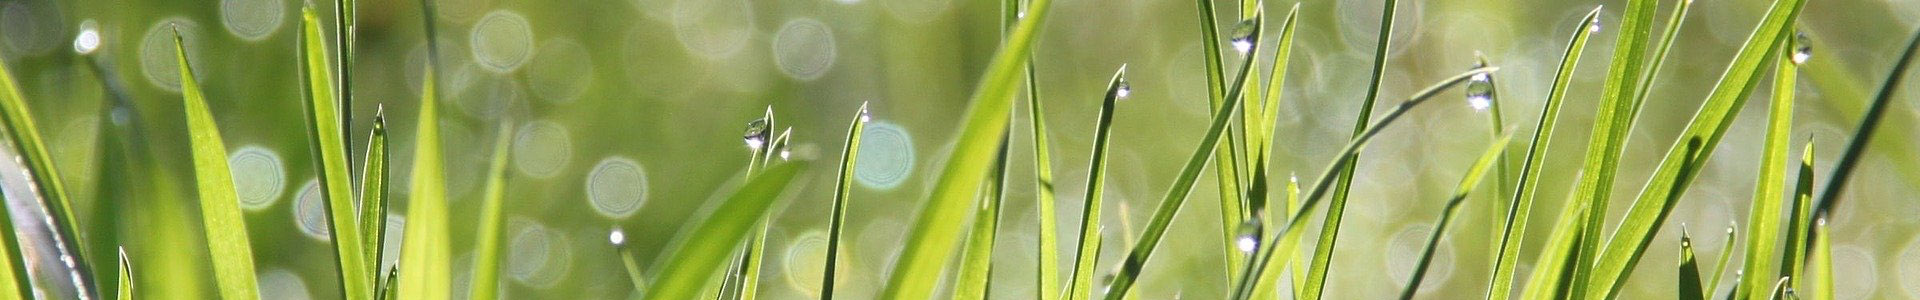 up close view of sunlight on grass dew